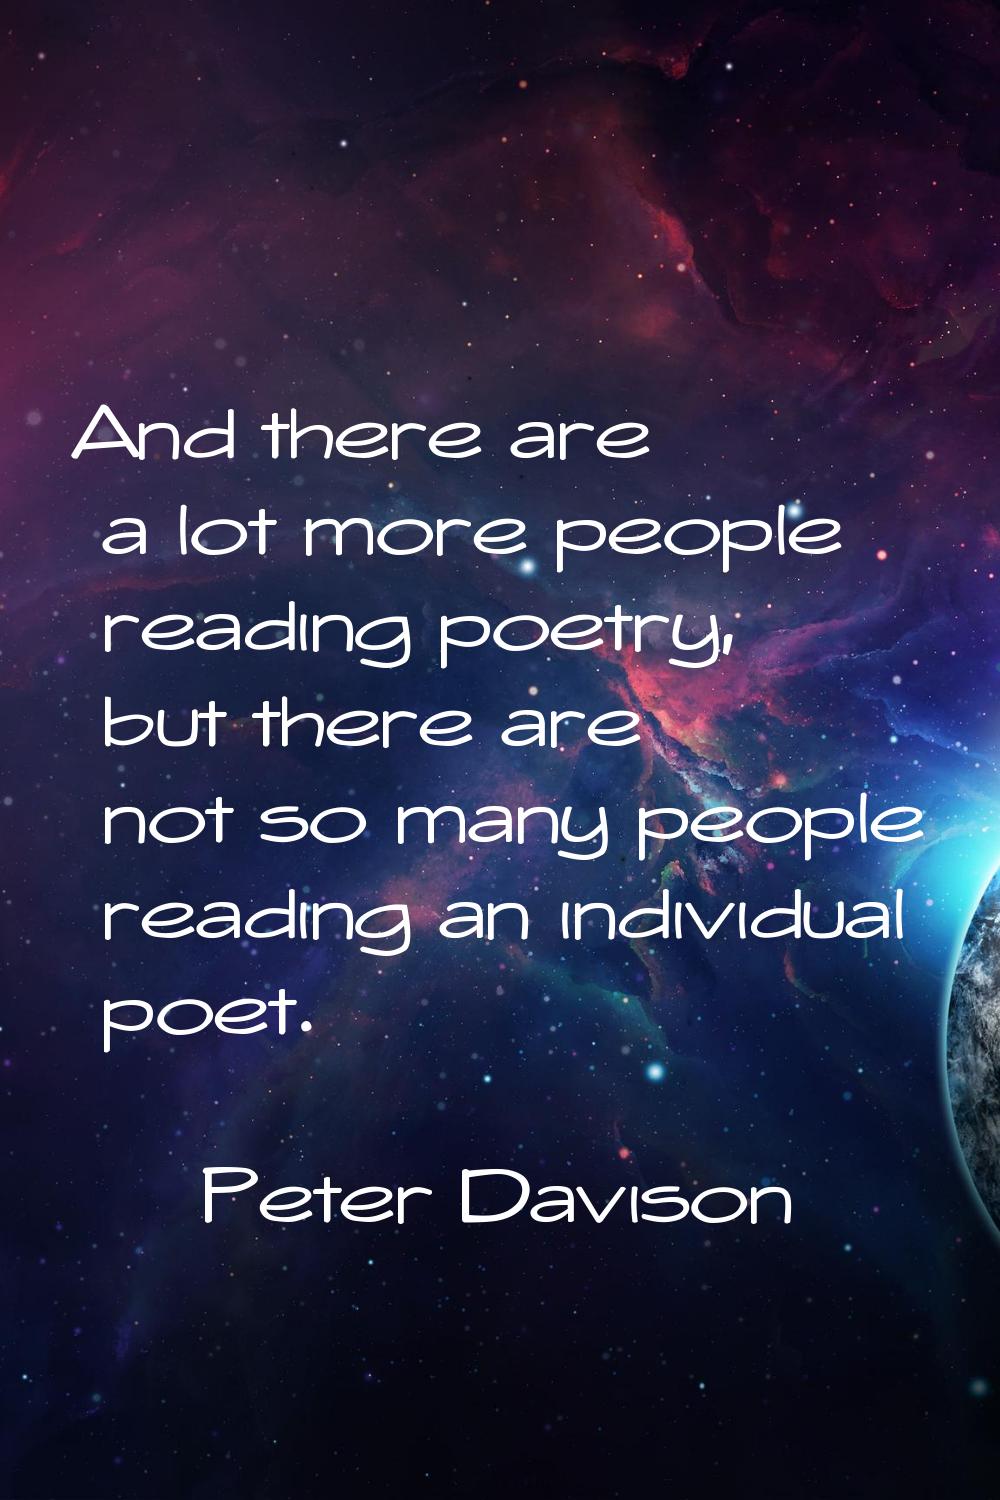 And there are a lot more people reading poetry, but there are not so many people reading an individ